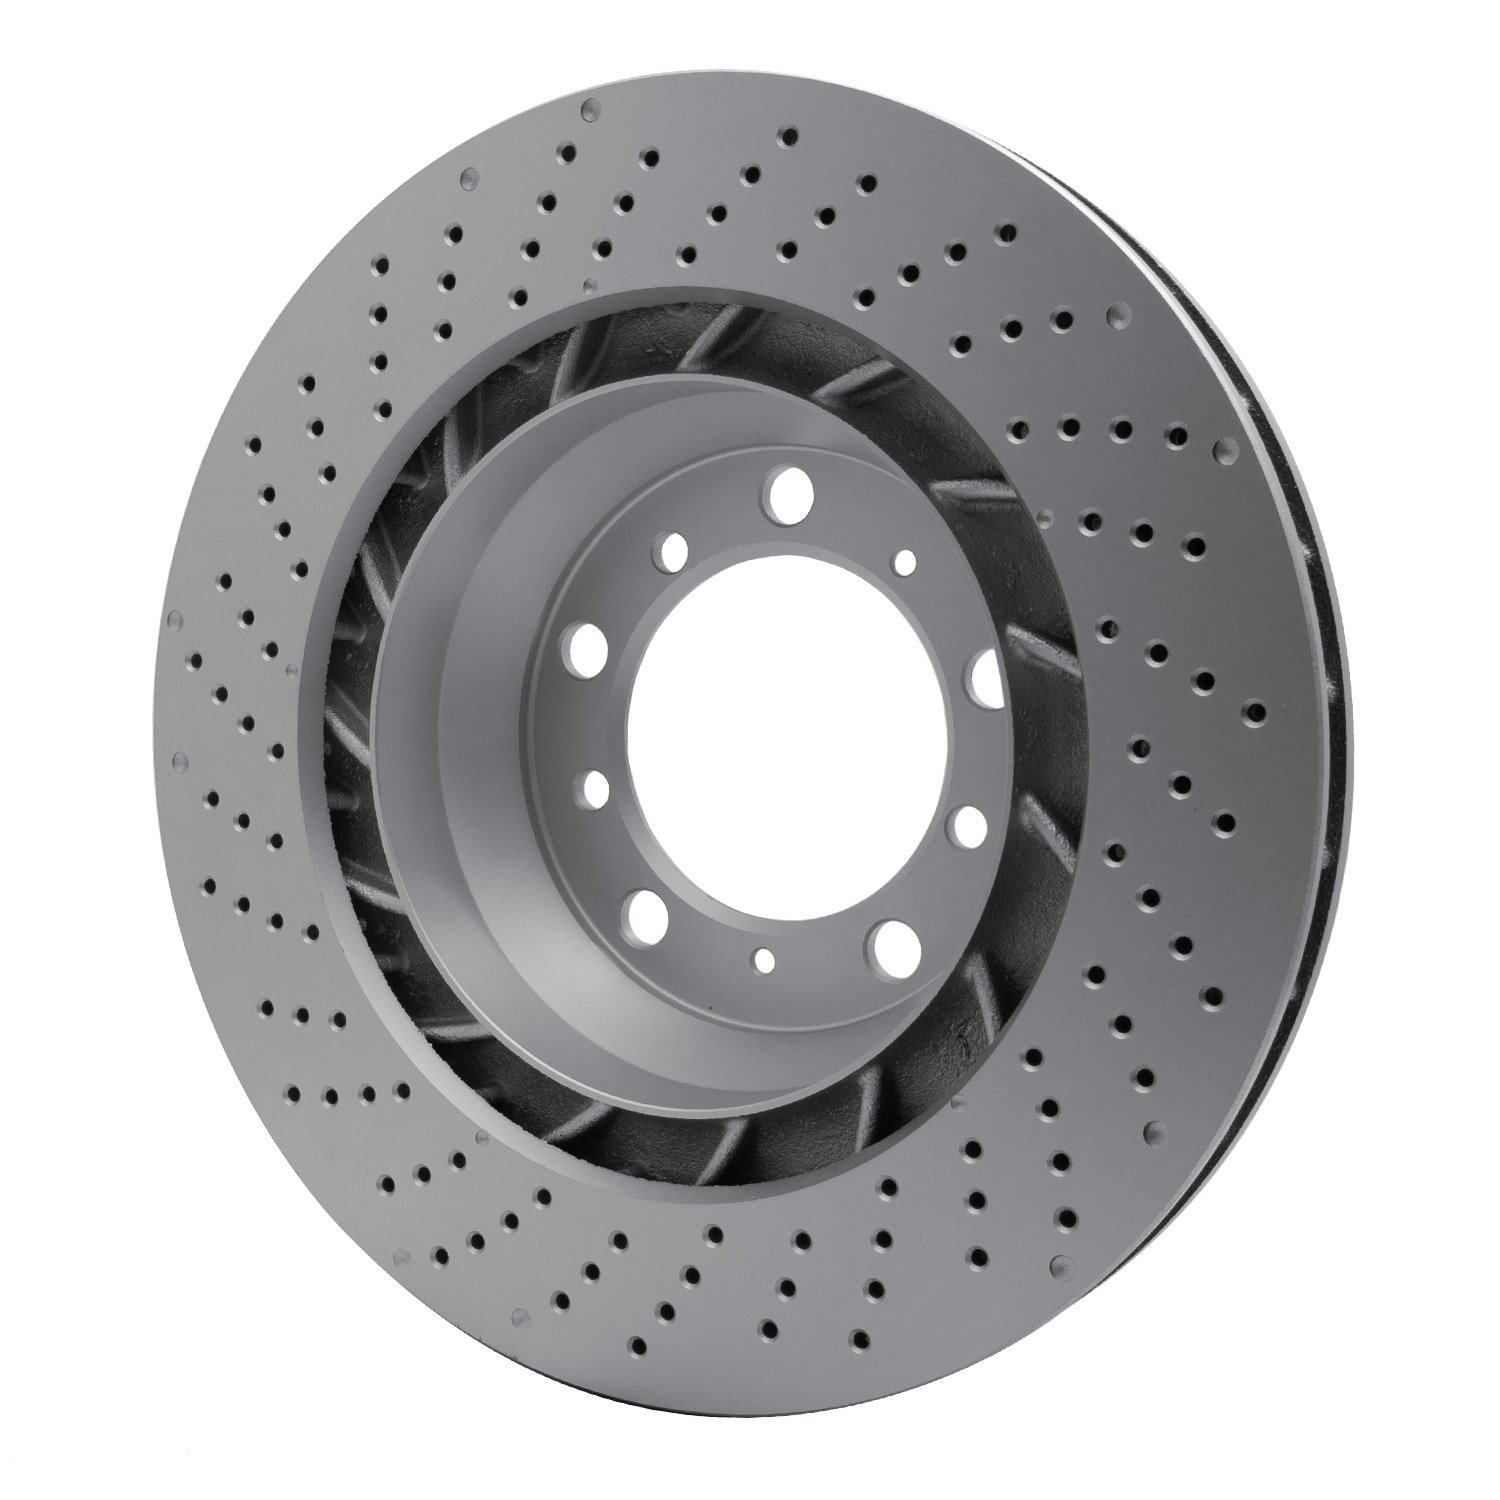 GEOSPEC Drilled Rotor [Coated], Fits Select Porsche